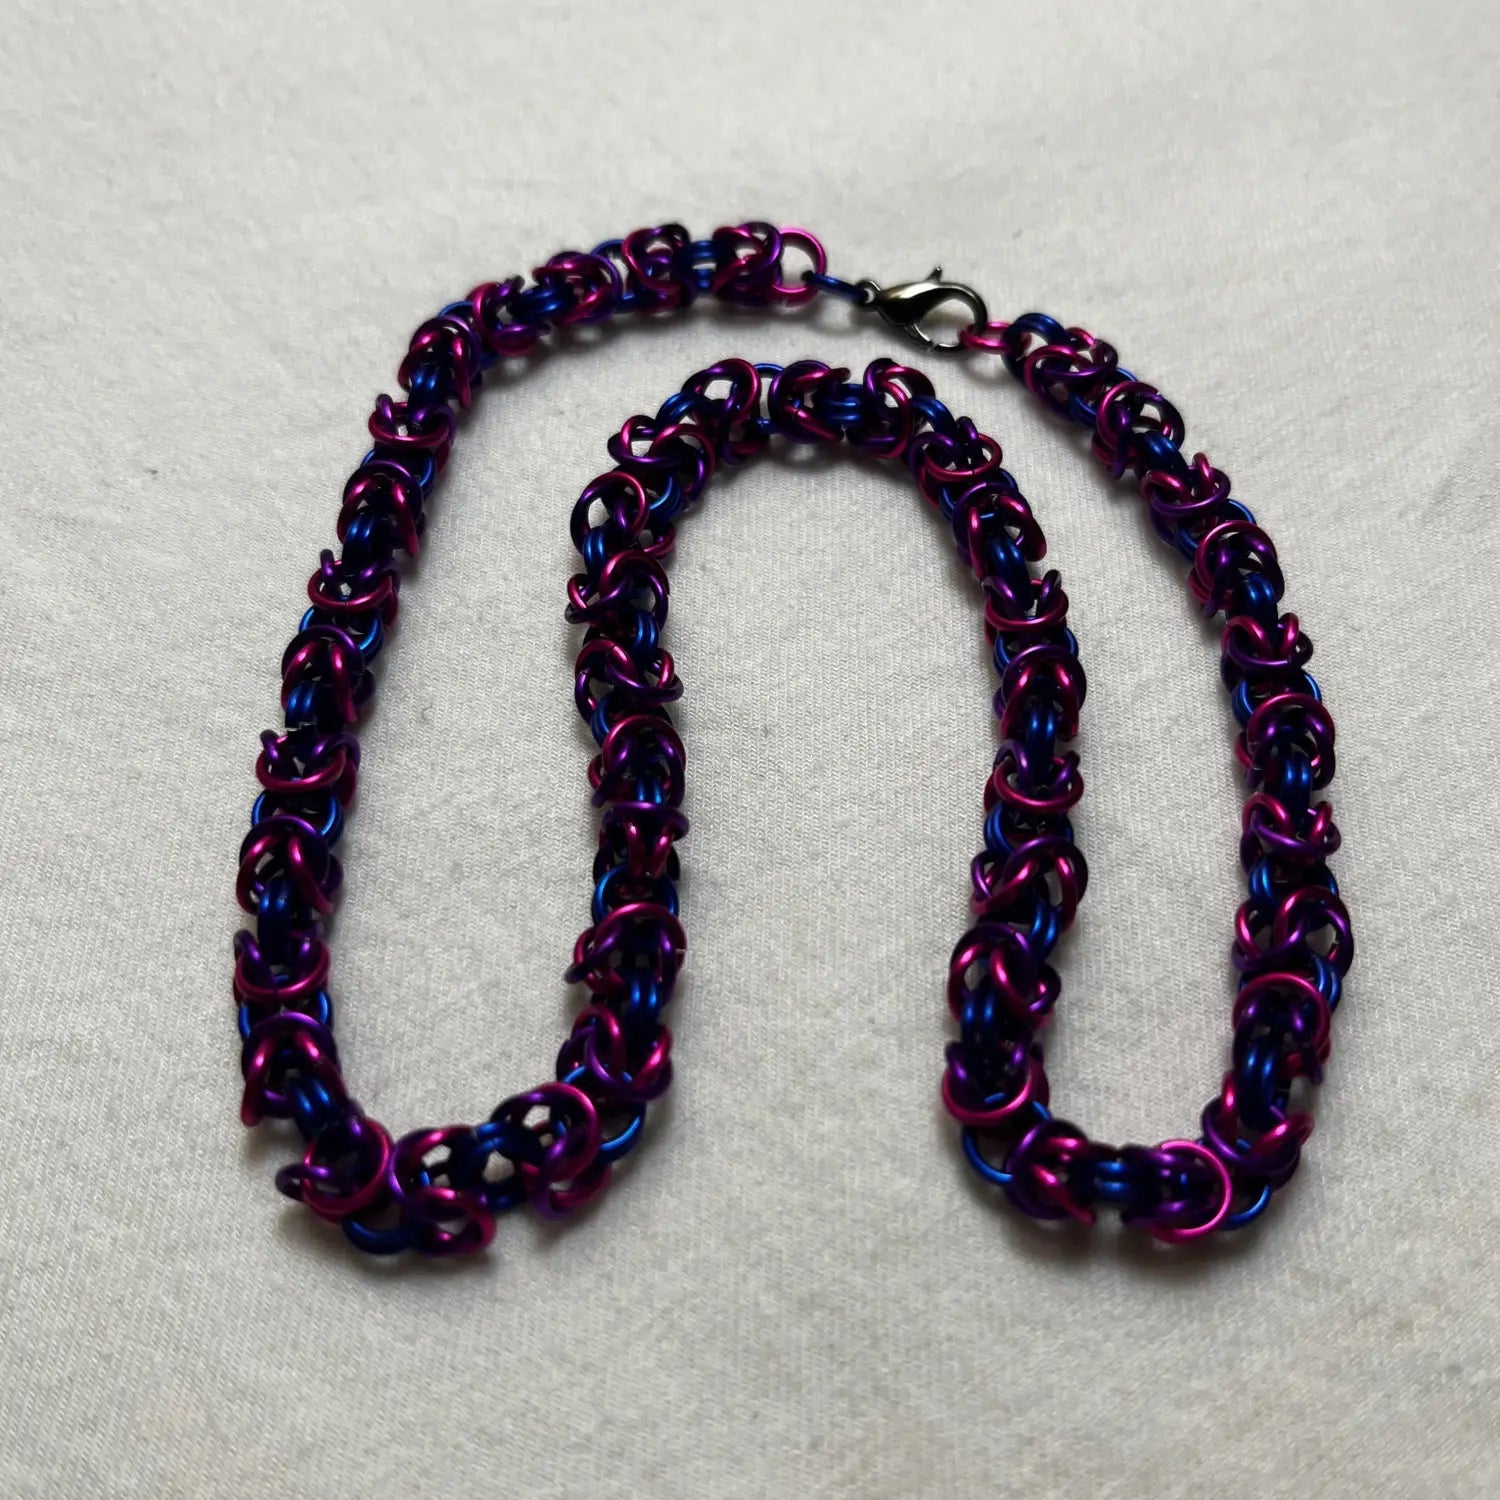 Chainmail Necklace - Bisexual Pride / Byzantine - Chainmail